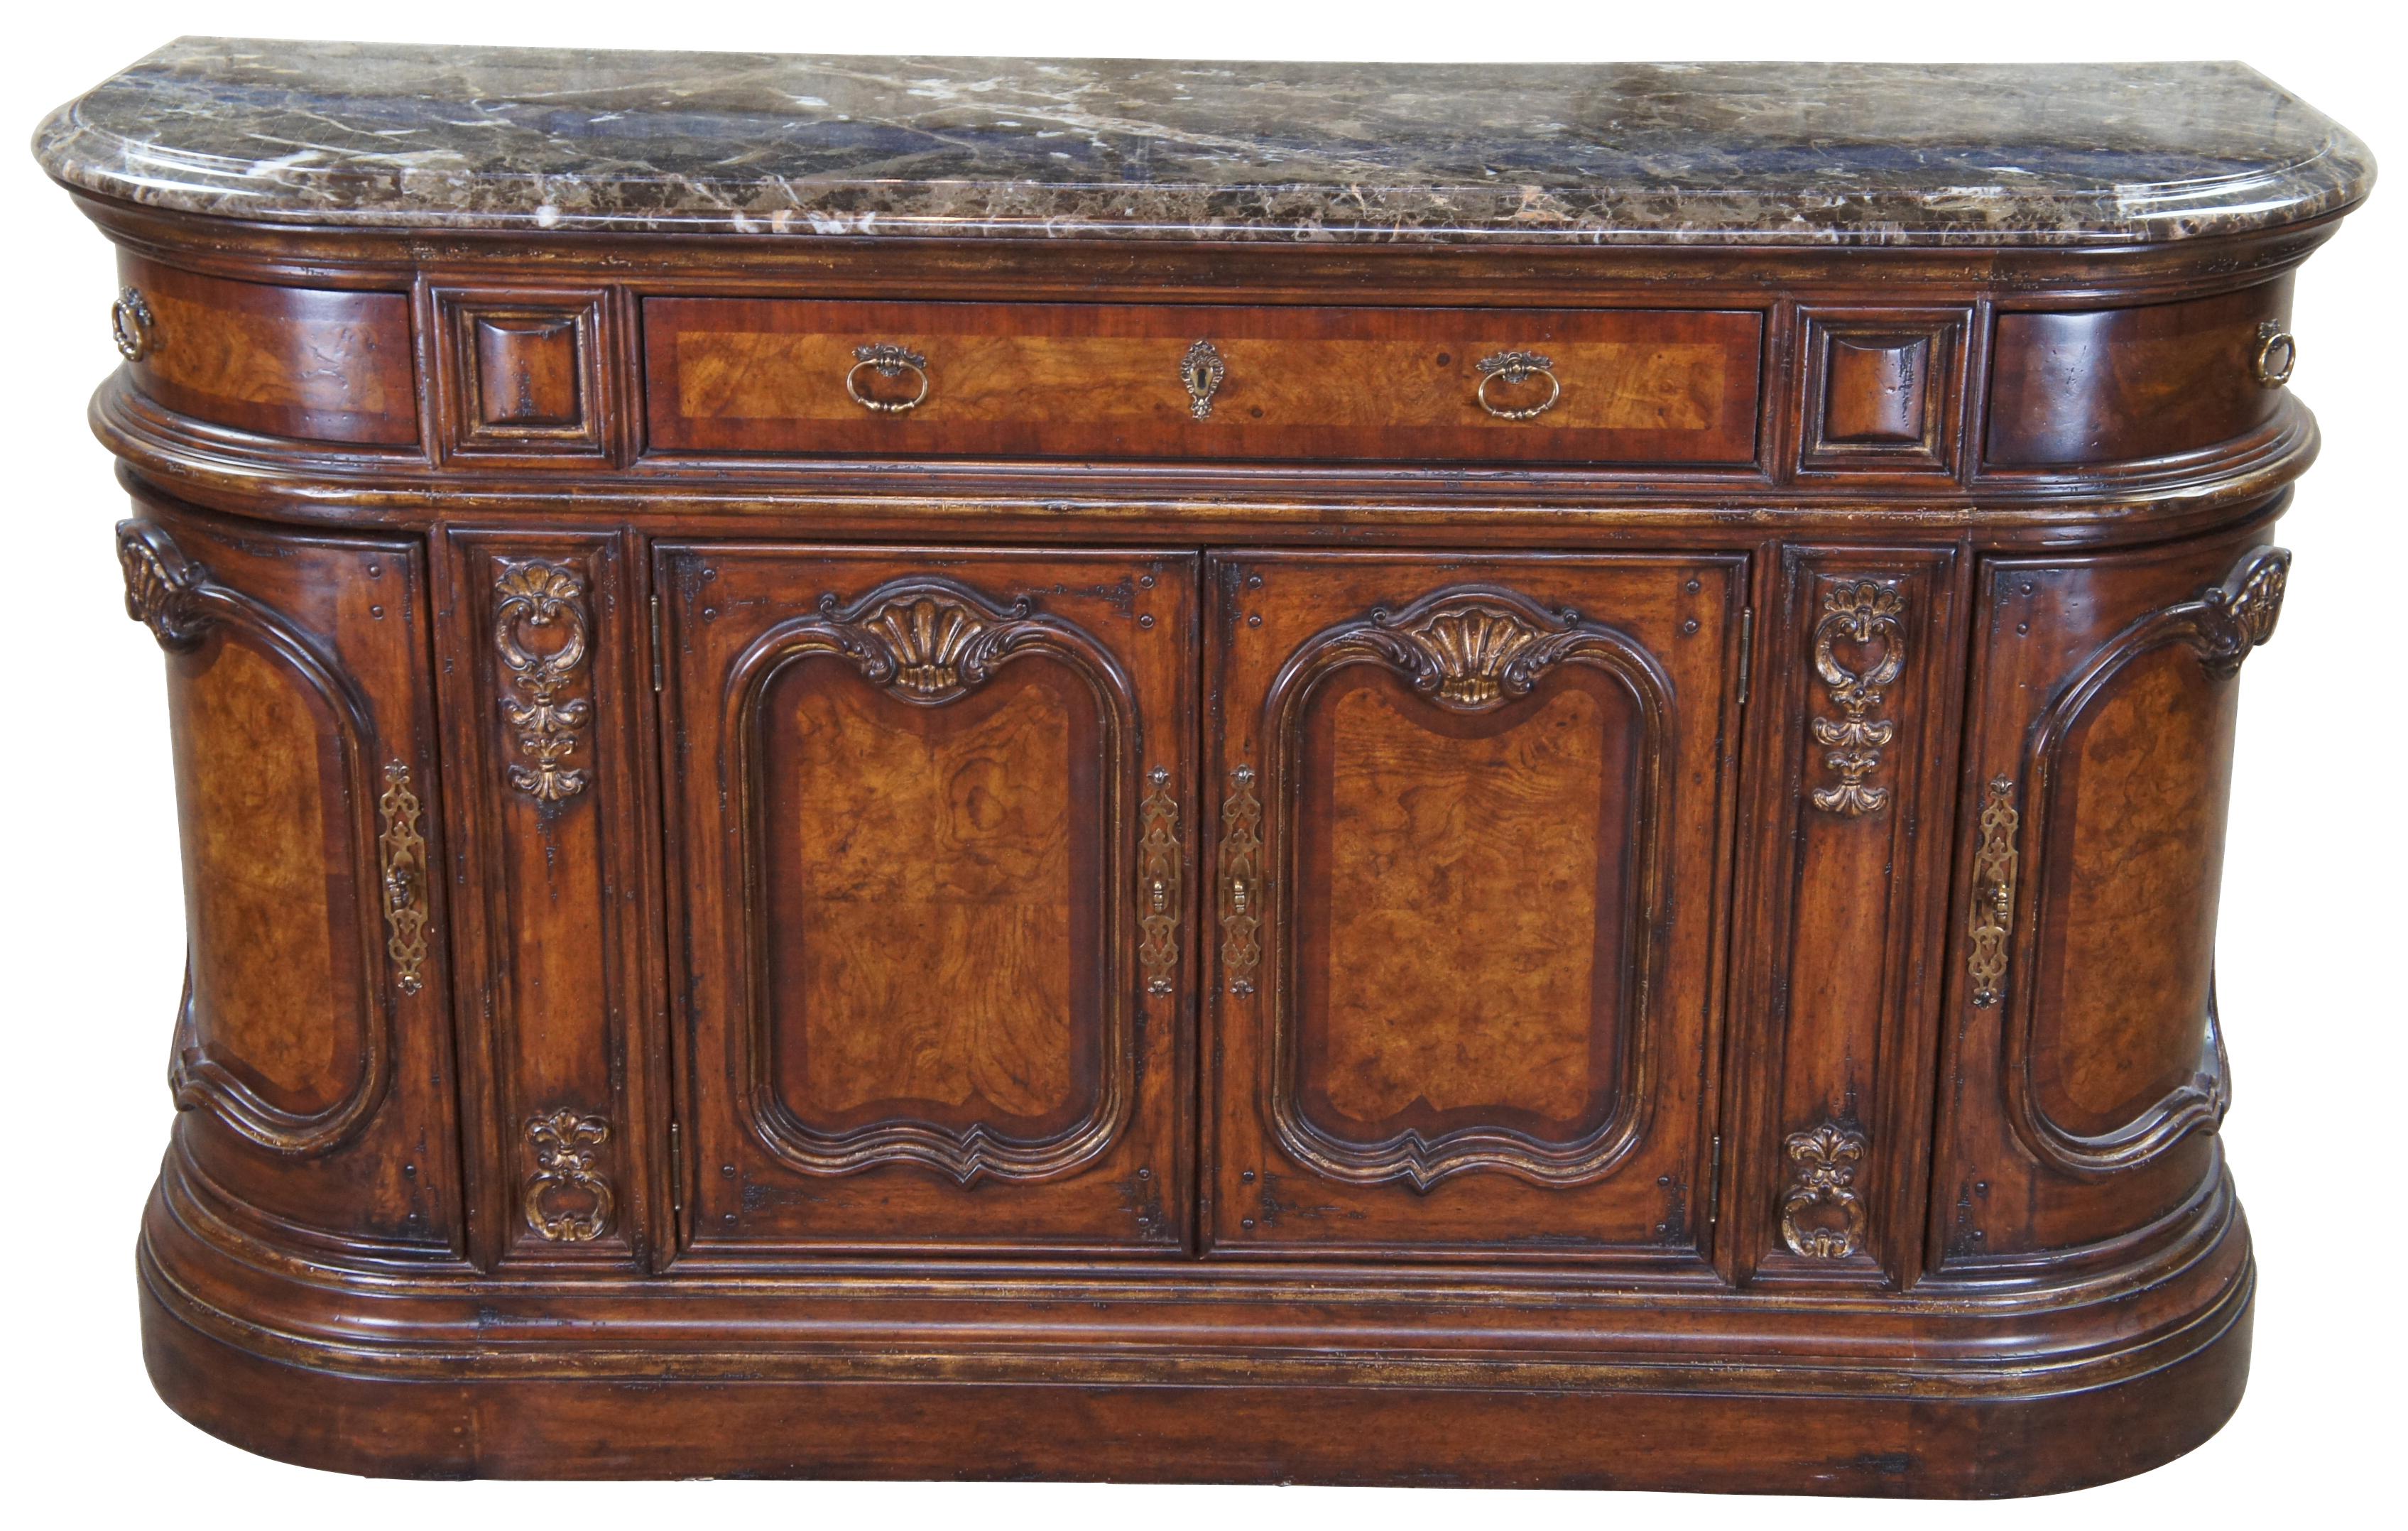 Baroque Revival sideboard by Marge Carson. Crescent or D shaped with a beautiful ash burl and golden scalloped trim. Features a marble top, brass hardware, silverware drawer and plenty of accessory storage. Measure: 72